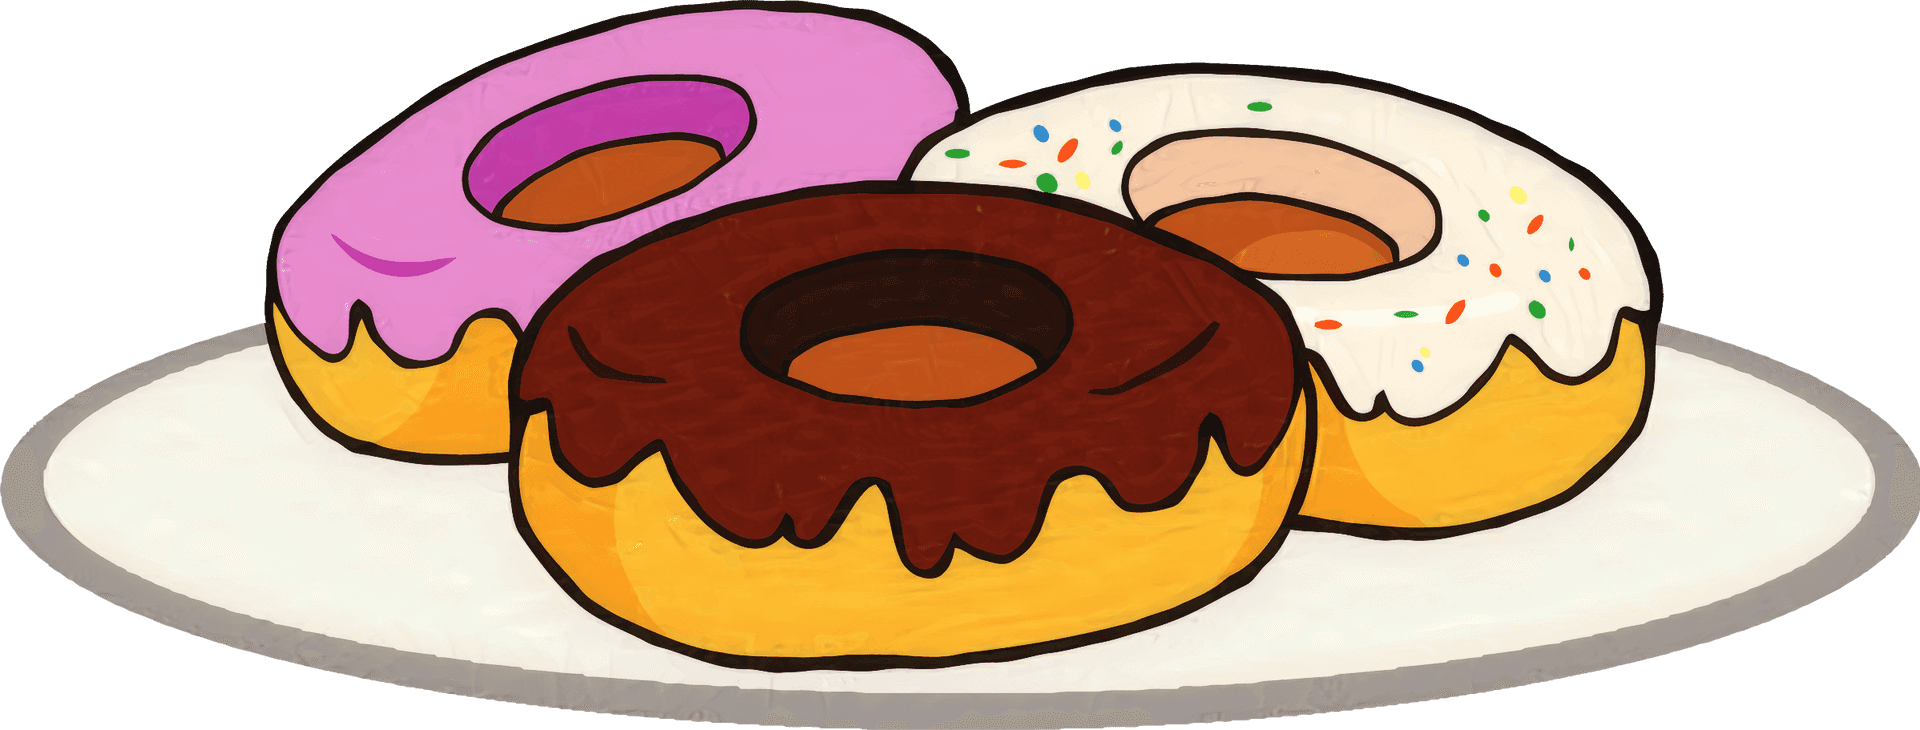 Assorted Cartoon Donutson Plate PNG image